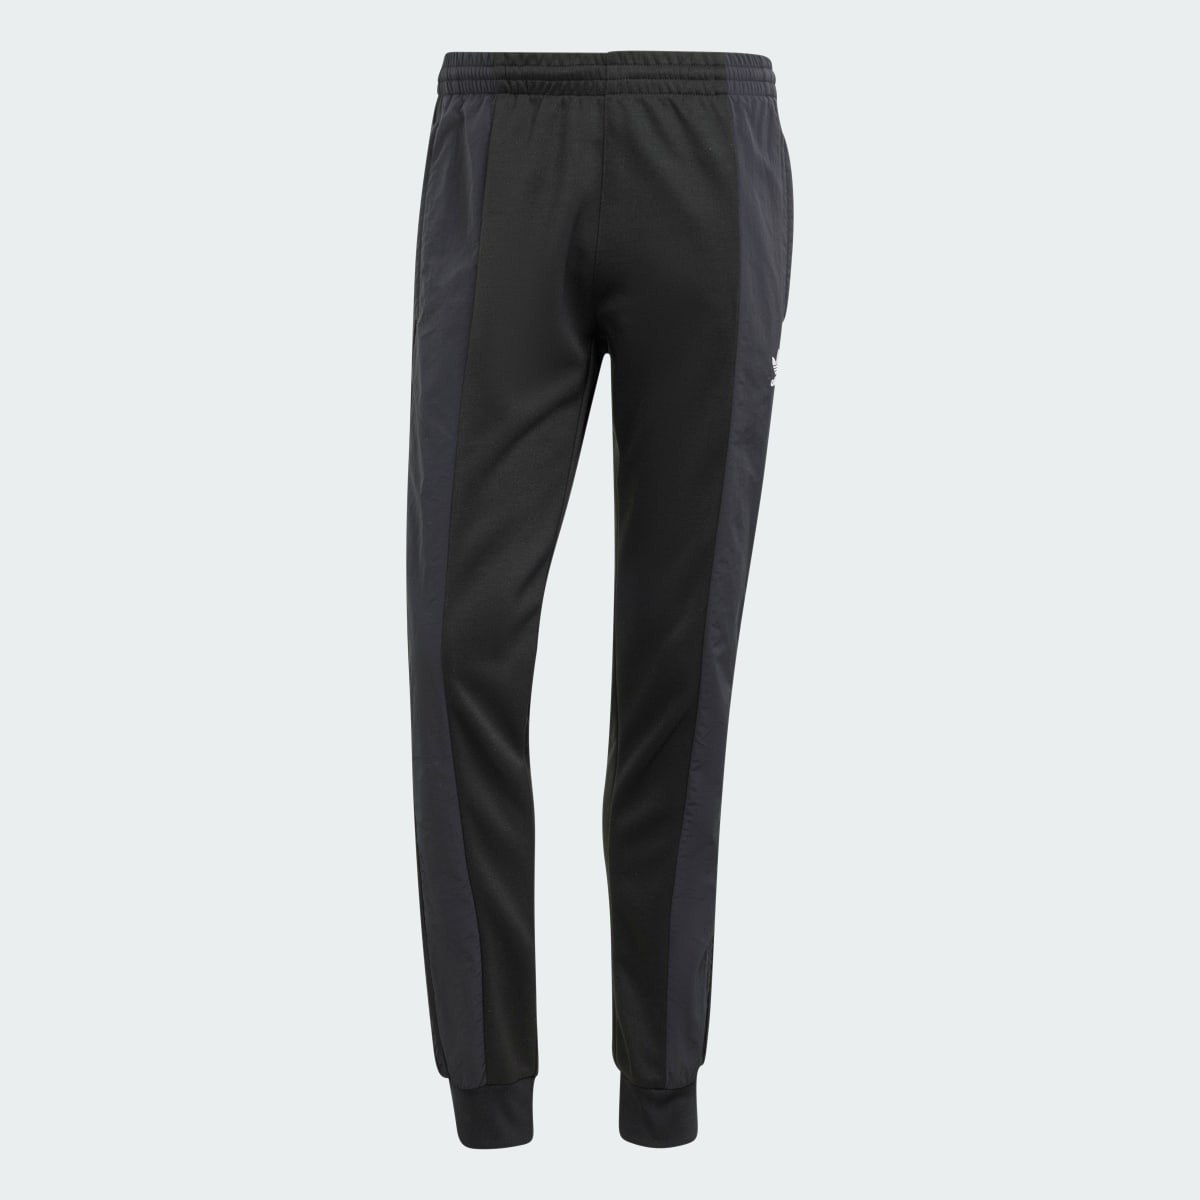 Adidas Track pants adicolor Re-Pro SST Material Mix. 4